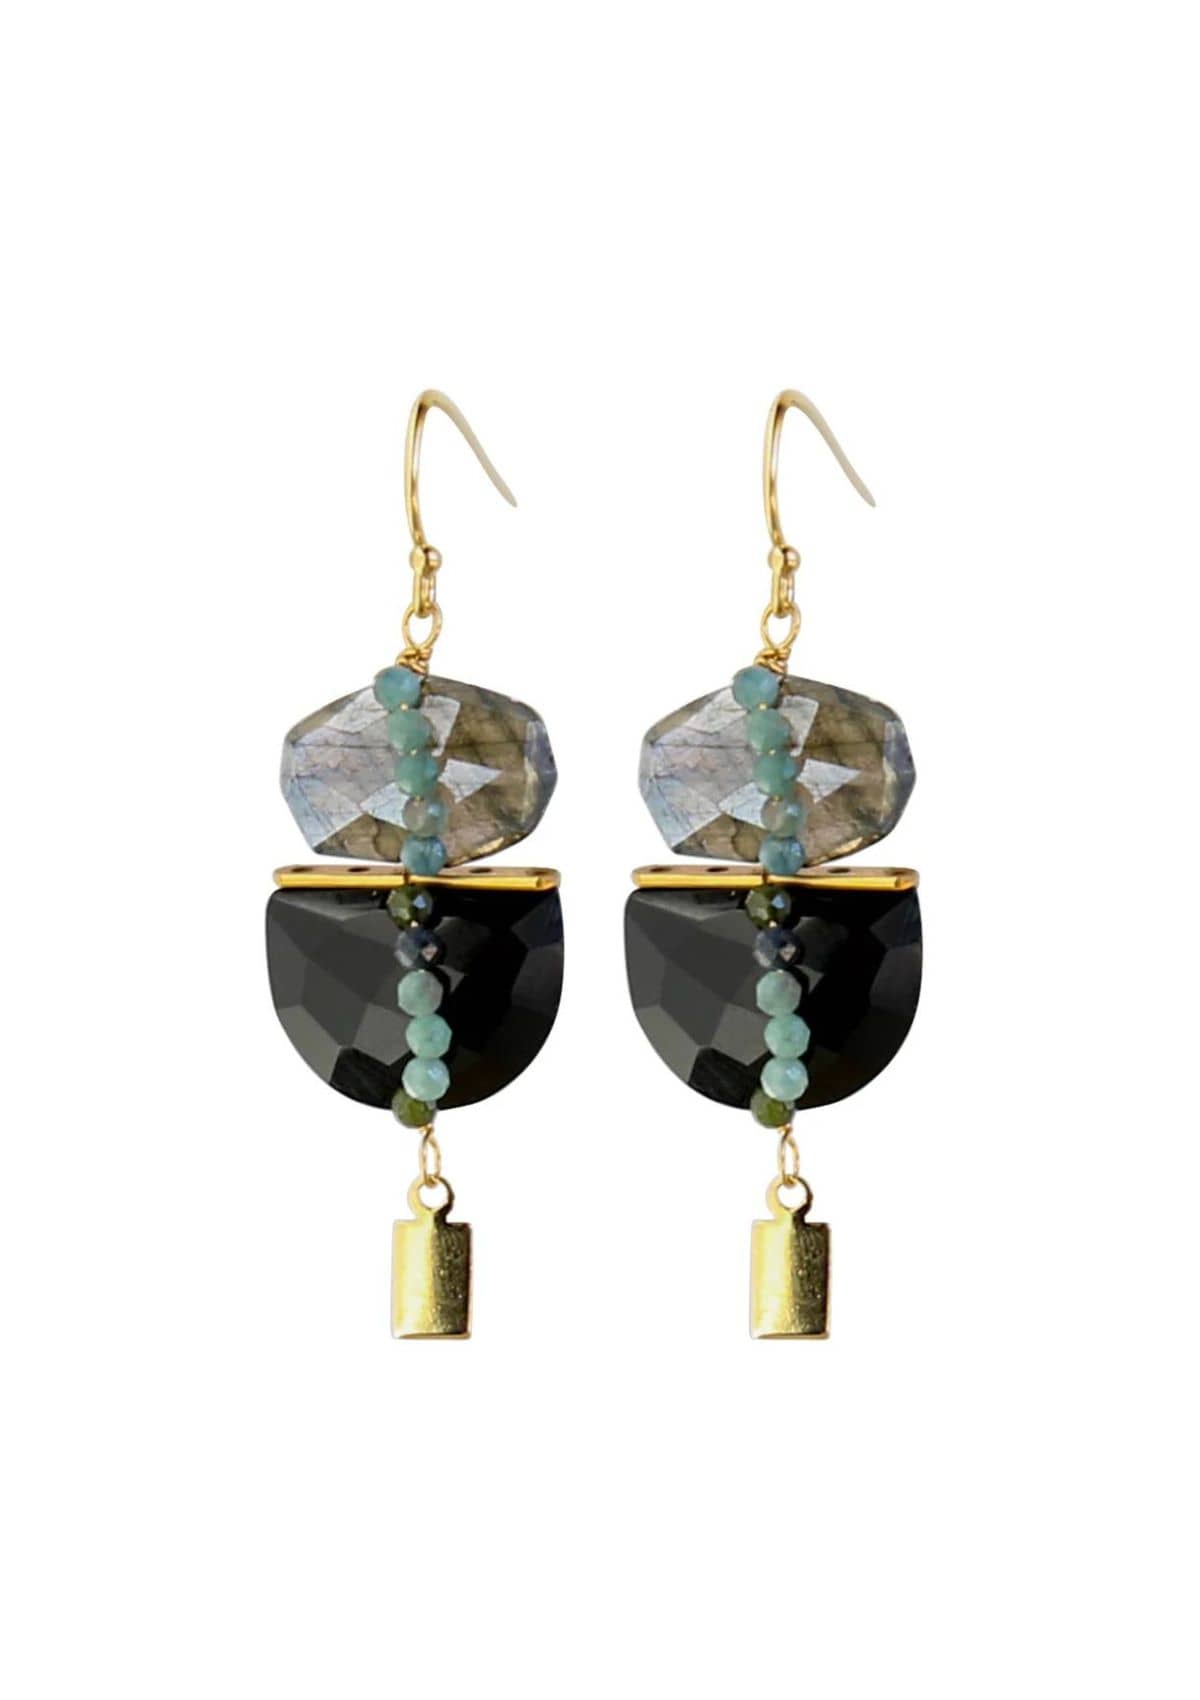 Duet Earrings - Black Spinel -Catherine Page- Ruby Jane-